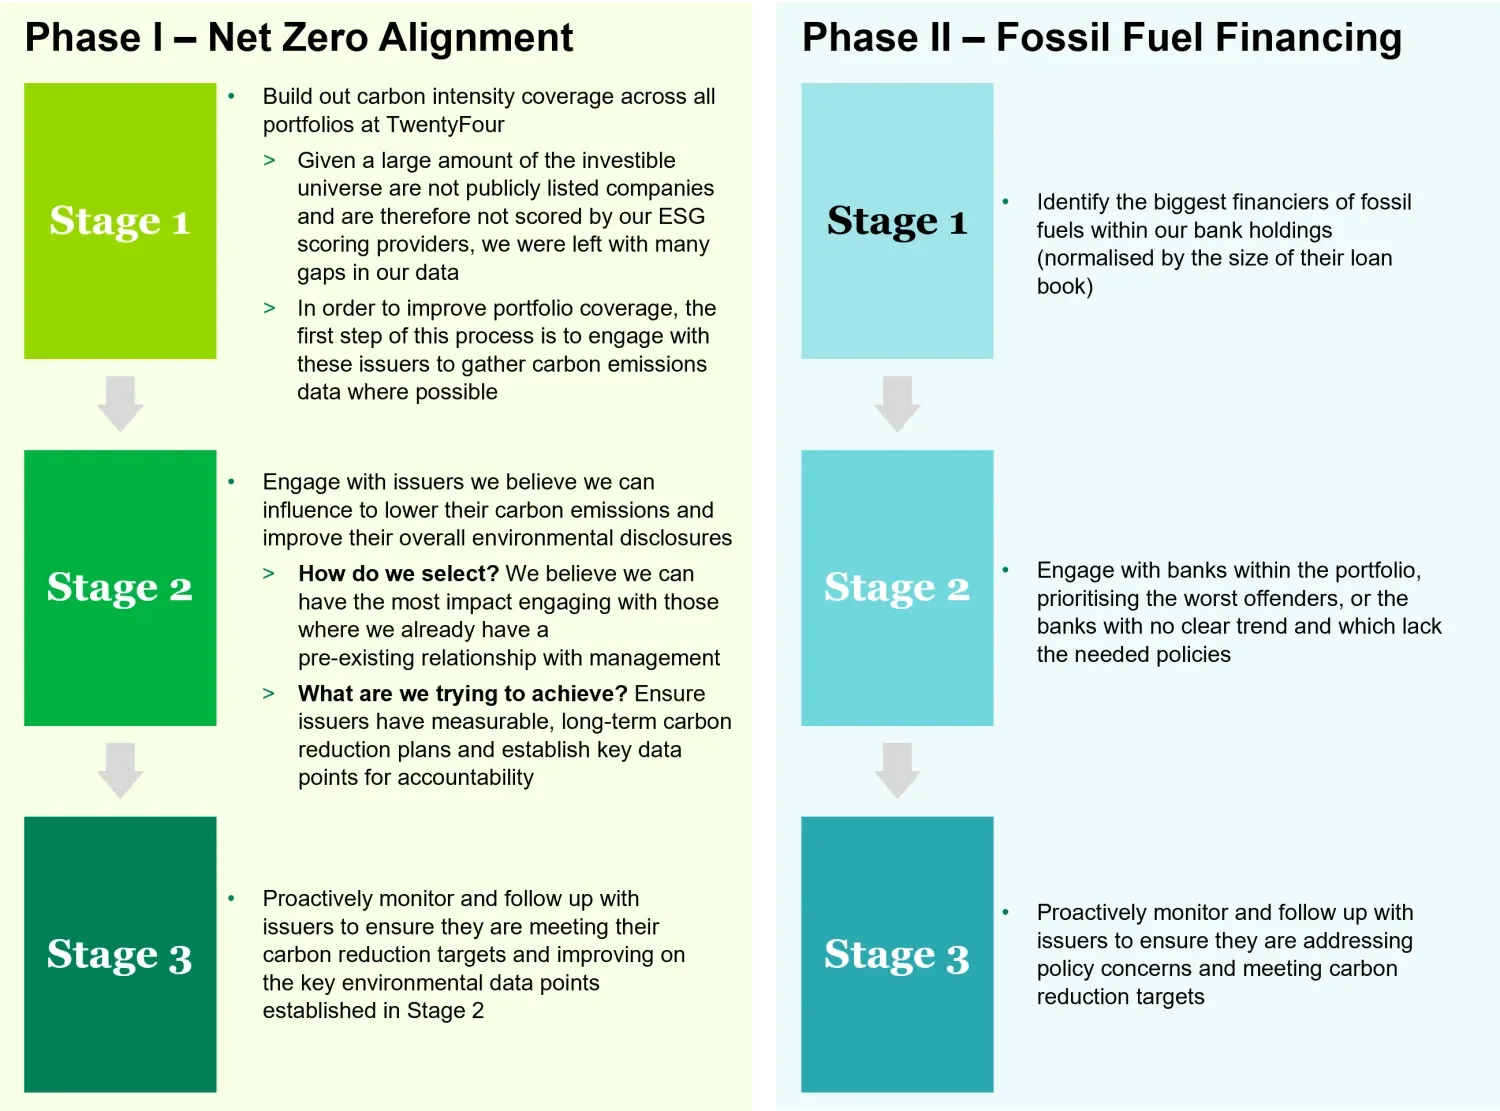 Fossil Fuel Financing